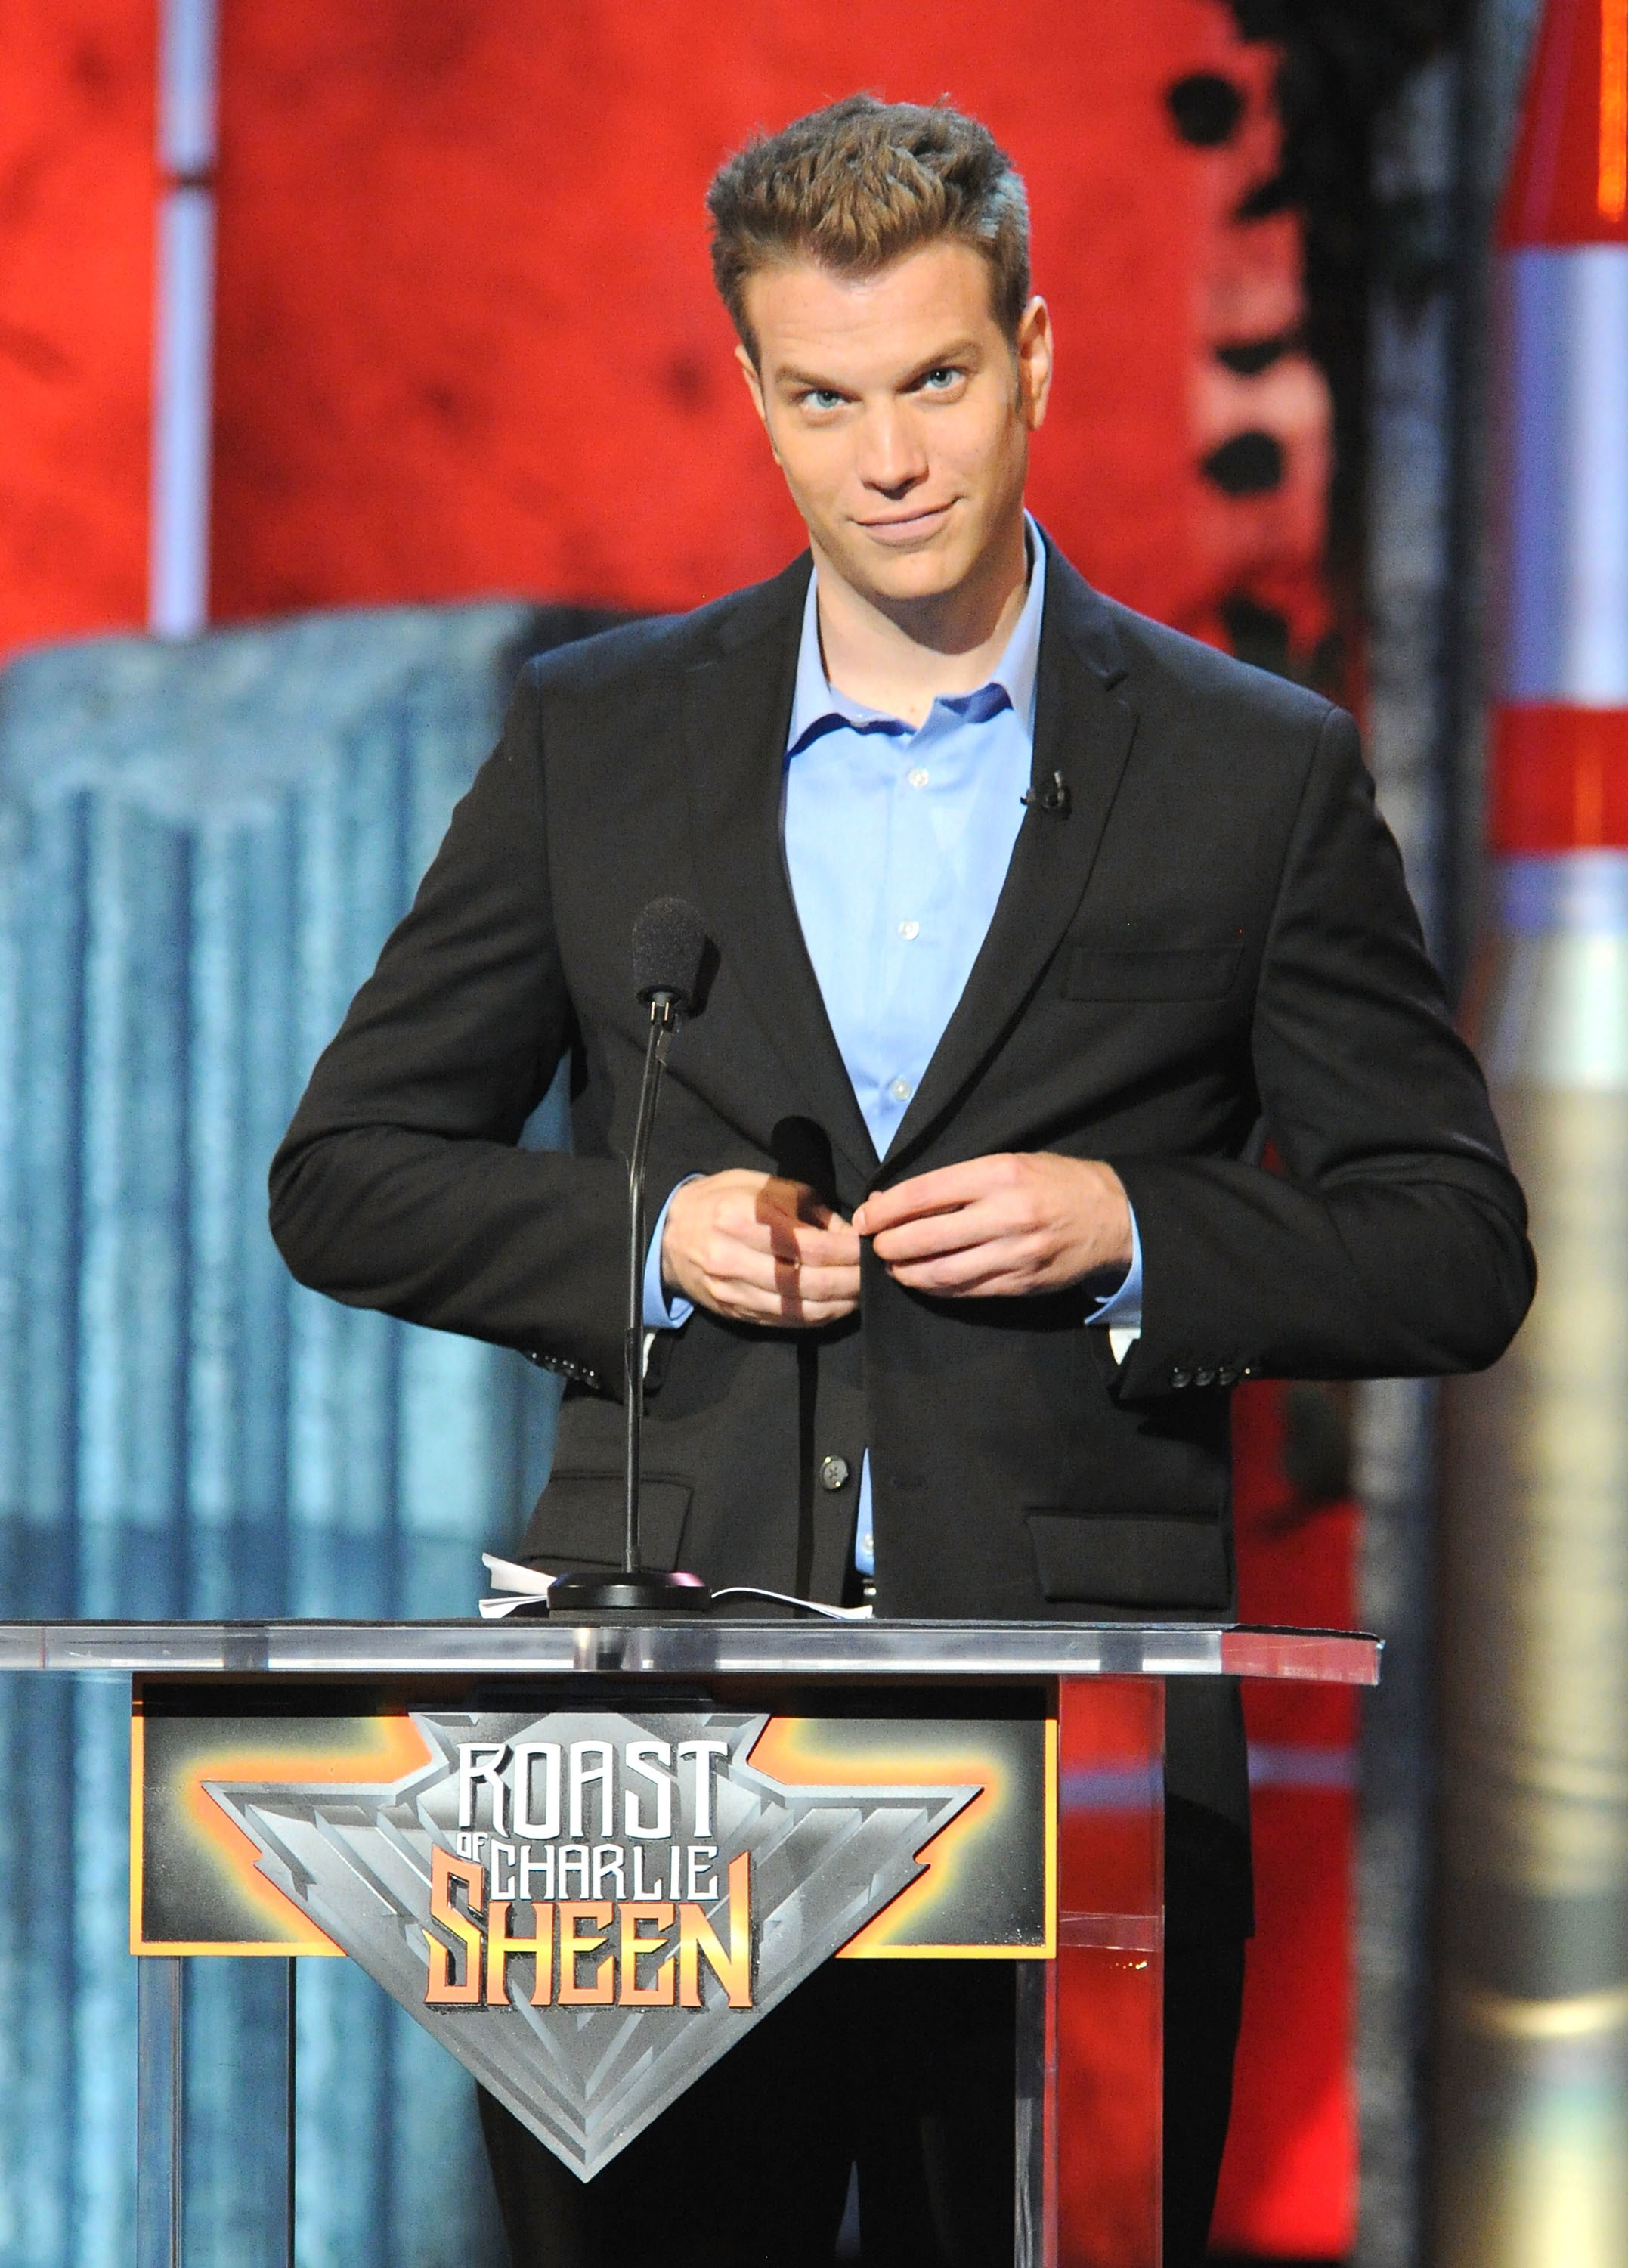 <p>Anthony Jeselnik's comedy is extremely dark even in his normal set, so it's not a surprise he'd deliver the best line in the roast of a very dark individual Charlie Sheen. "The only reason you got on TV in the first place is because God hates Michael J. Fox." He also said that every moment of Sheen's life "feels like the first two minutes of 'Law & Order SVU.'"</p><p>You may also like: <a href='https://www.yardbarker.com/entertainment/articles/20_country_songs_that_will_definitely_make_you_cry_040424/s1__37736863'>20 country songs that will definitely make you cry</a></p>